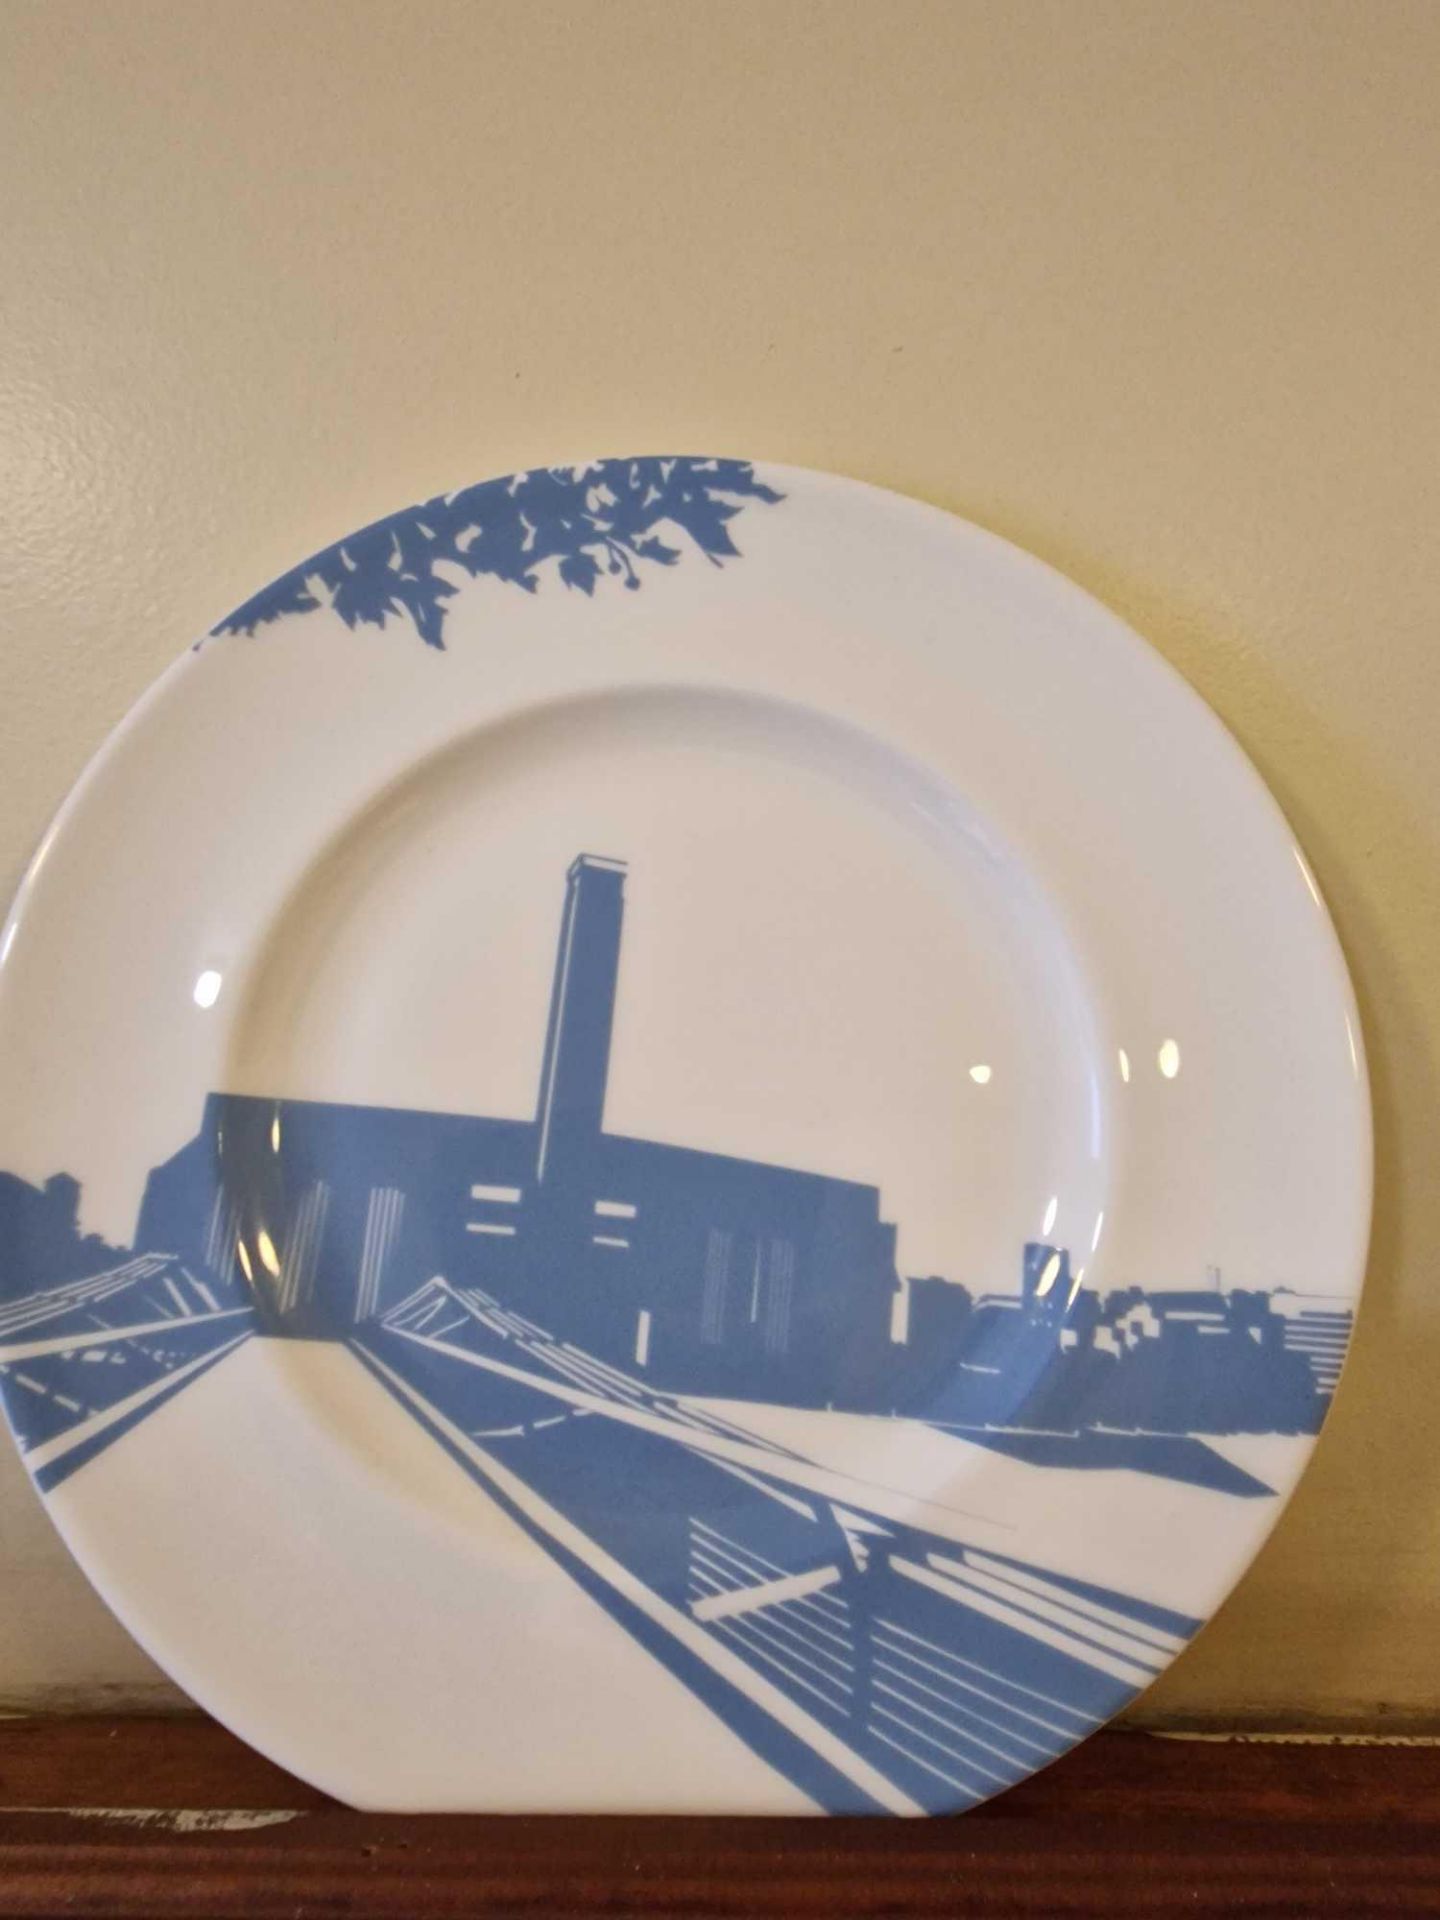 5 X Decorative Wall Plates Blue And White By Saxon And Snowdon Flood - Image 5 of 6